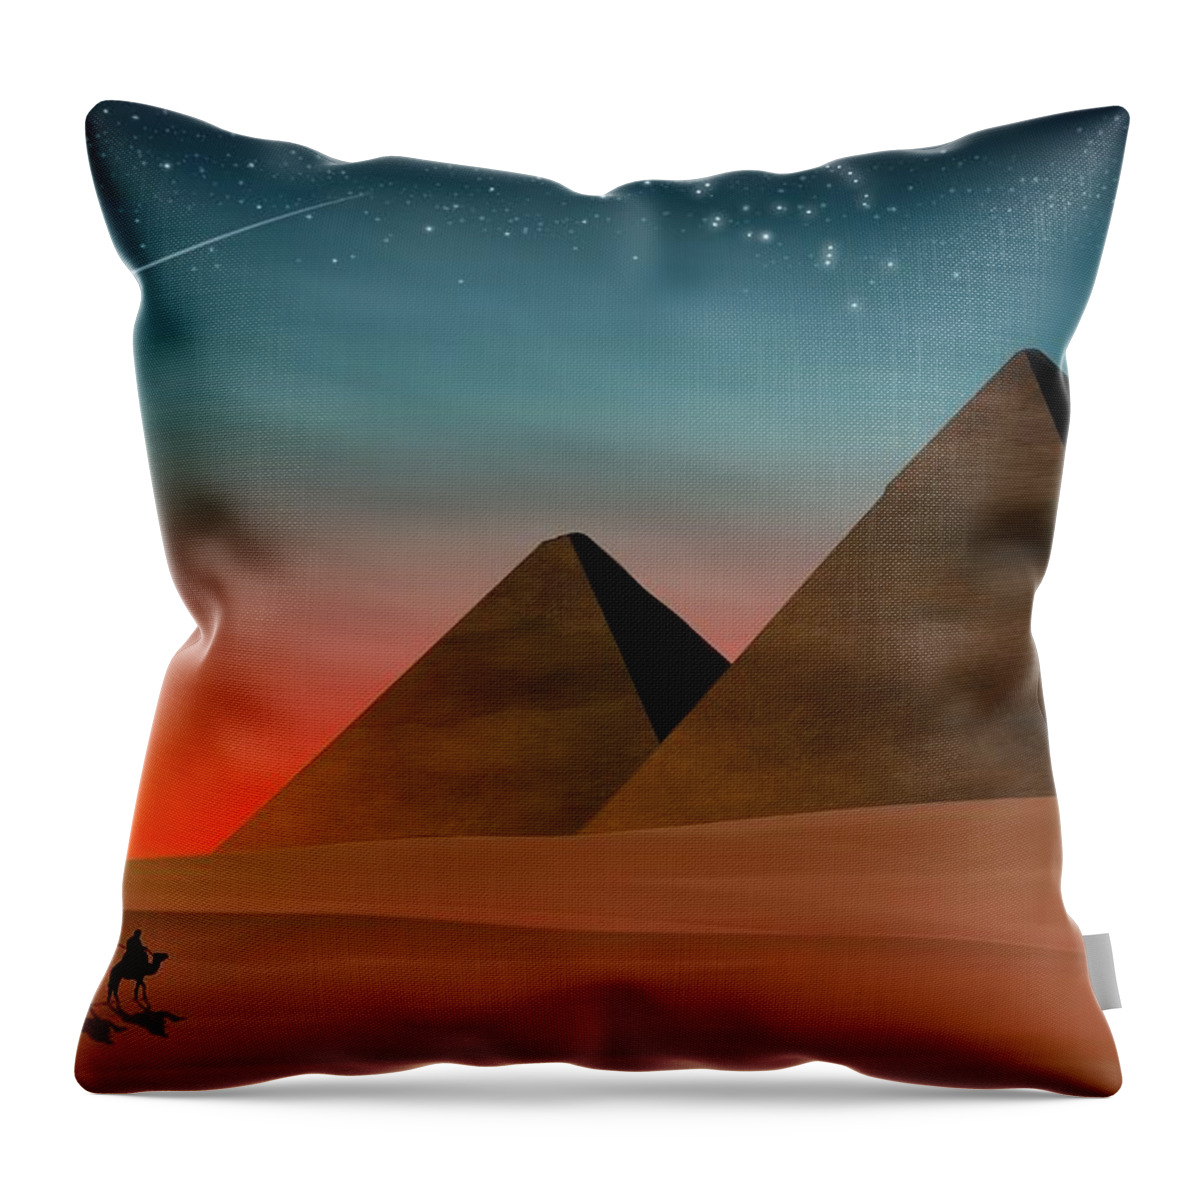 Desertscapes Throw Pillow featuring the digital art Egyptian Pyramids by John Wills